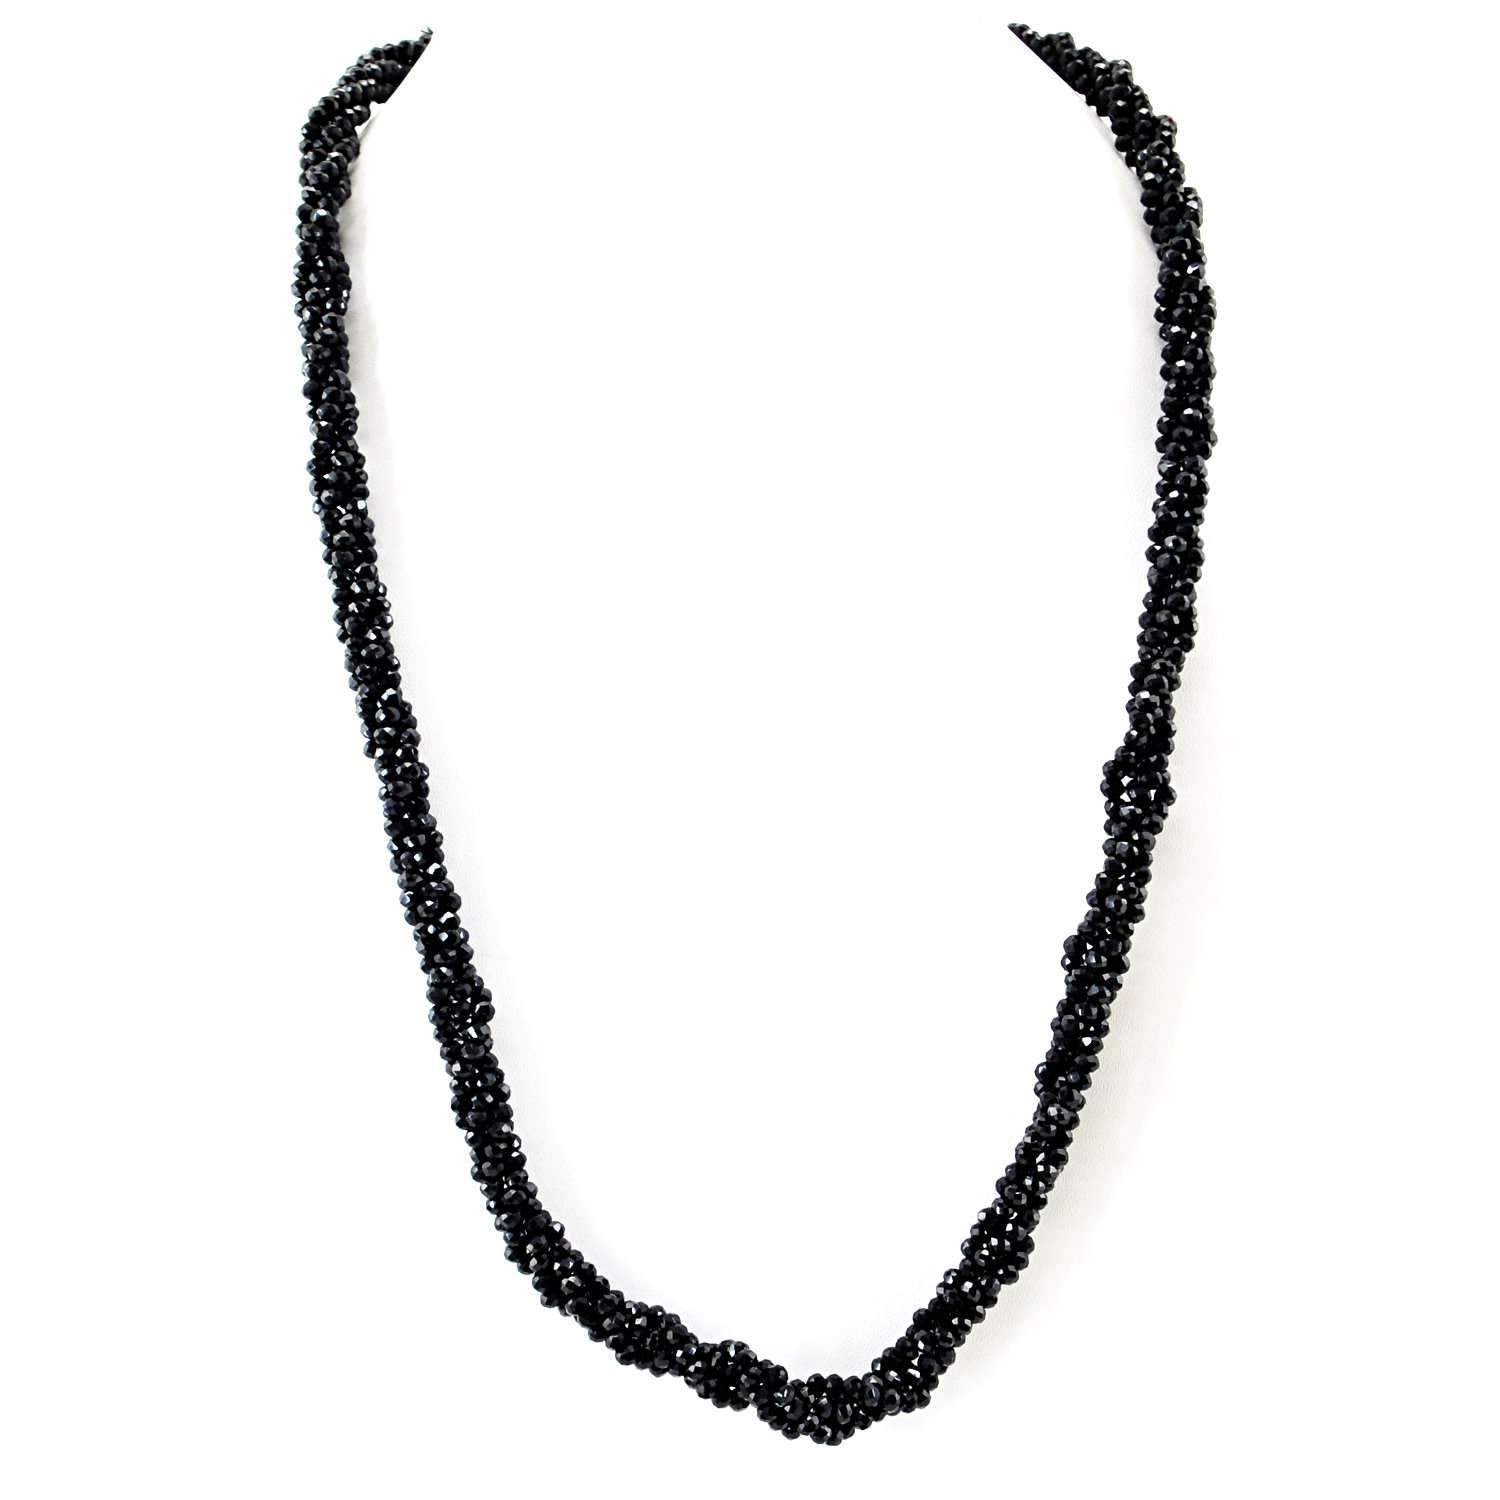 gemsmore:Natural Black Spinel Necklace Faceted Round Beads - 20 Inches Long